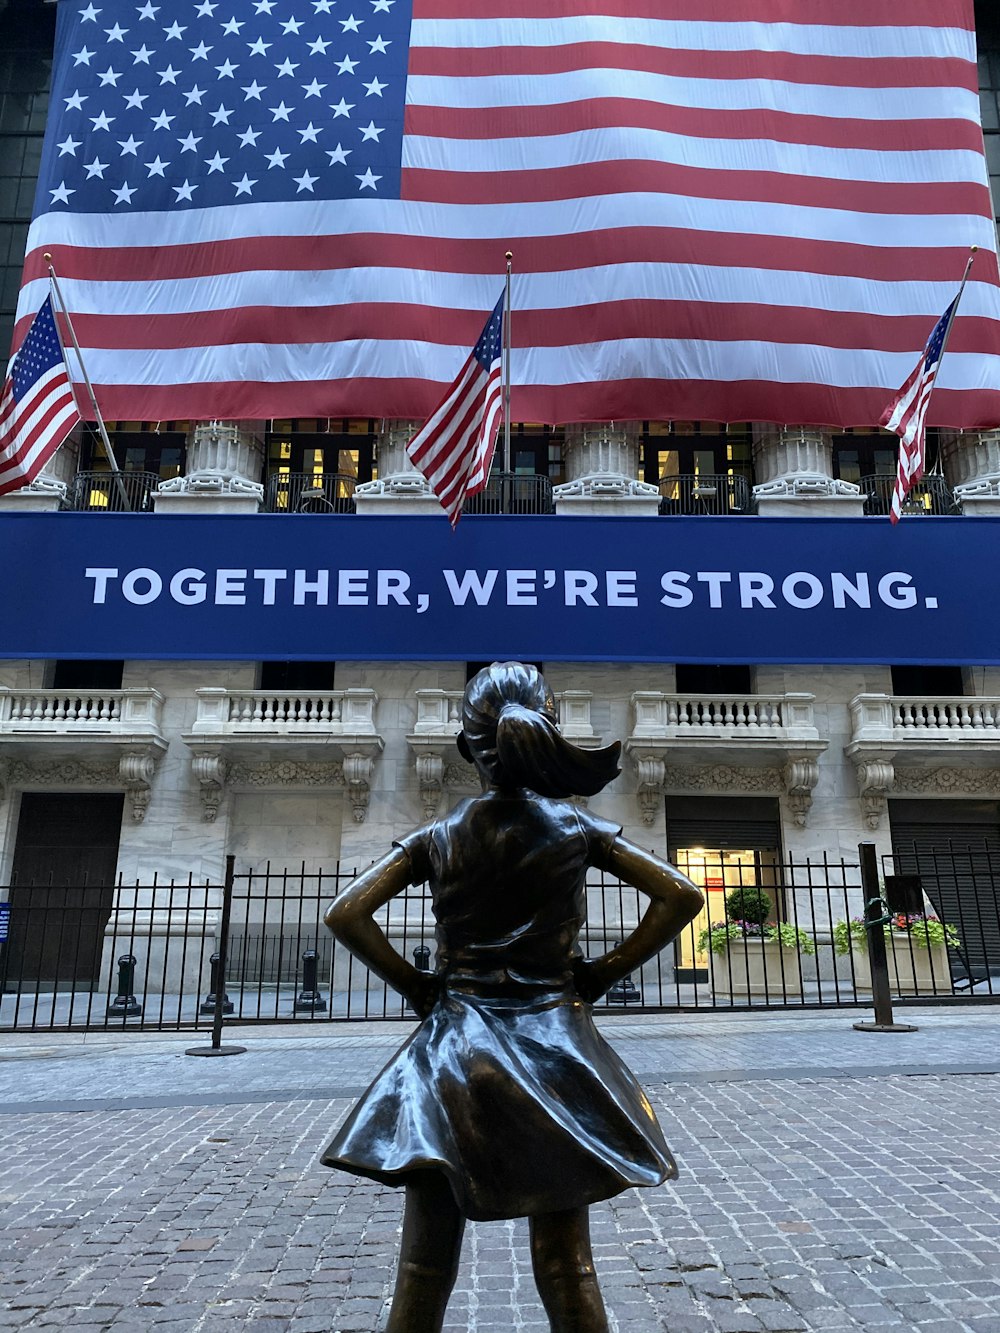 woman in black dress statue near american flag during daytime